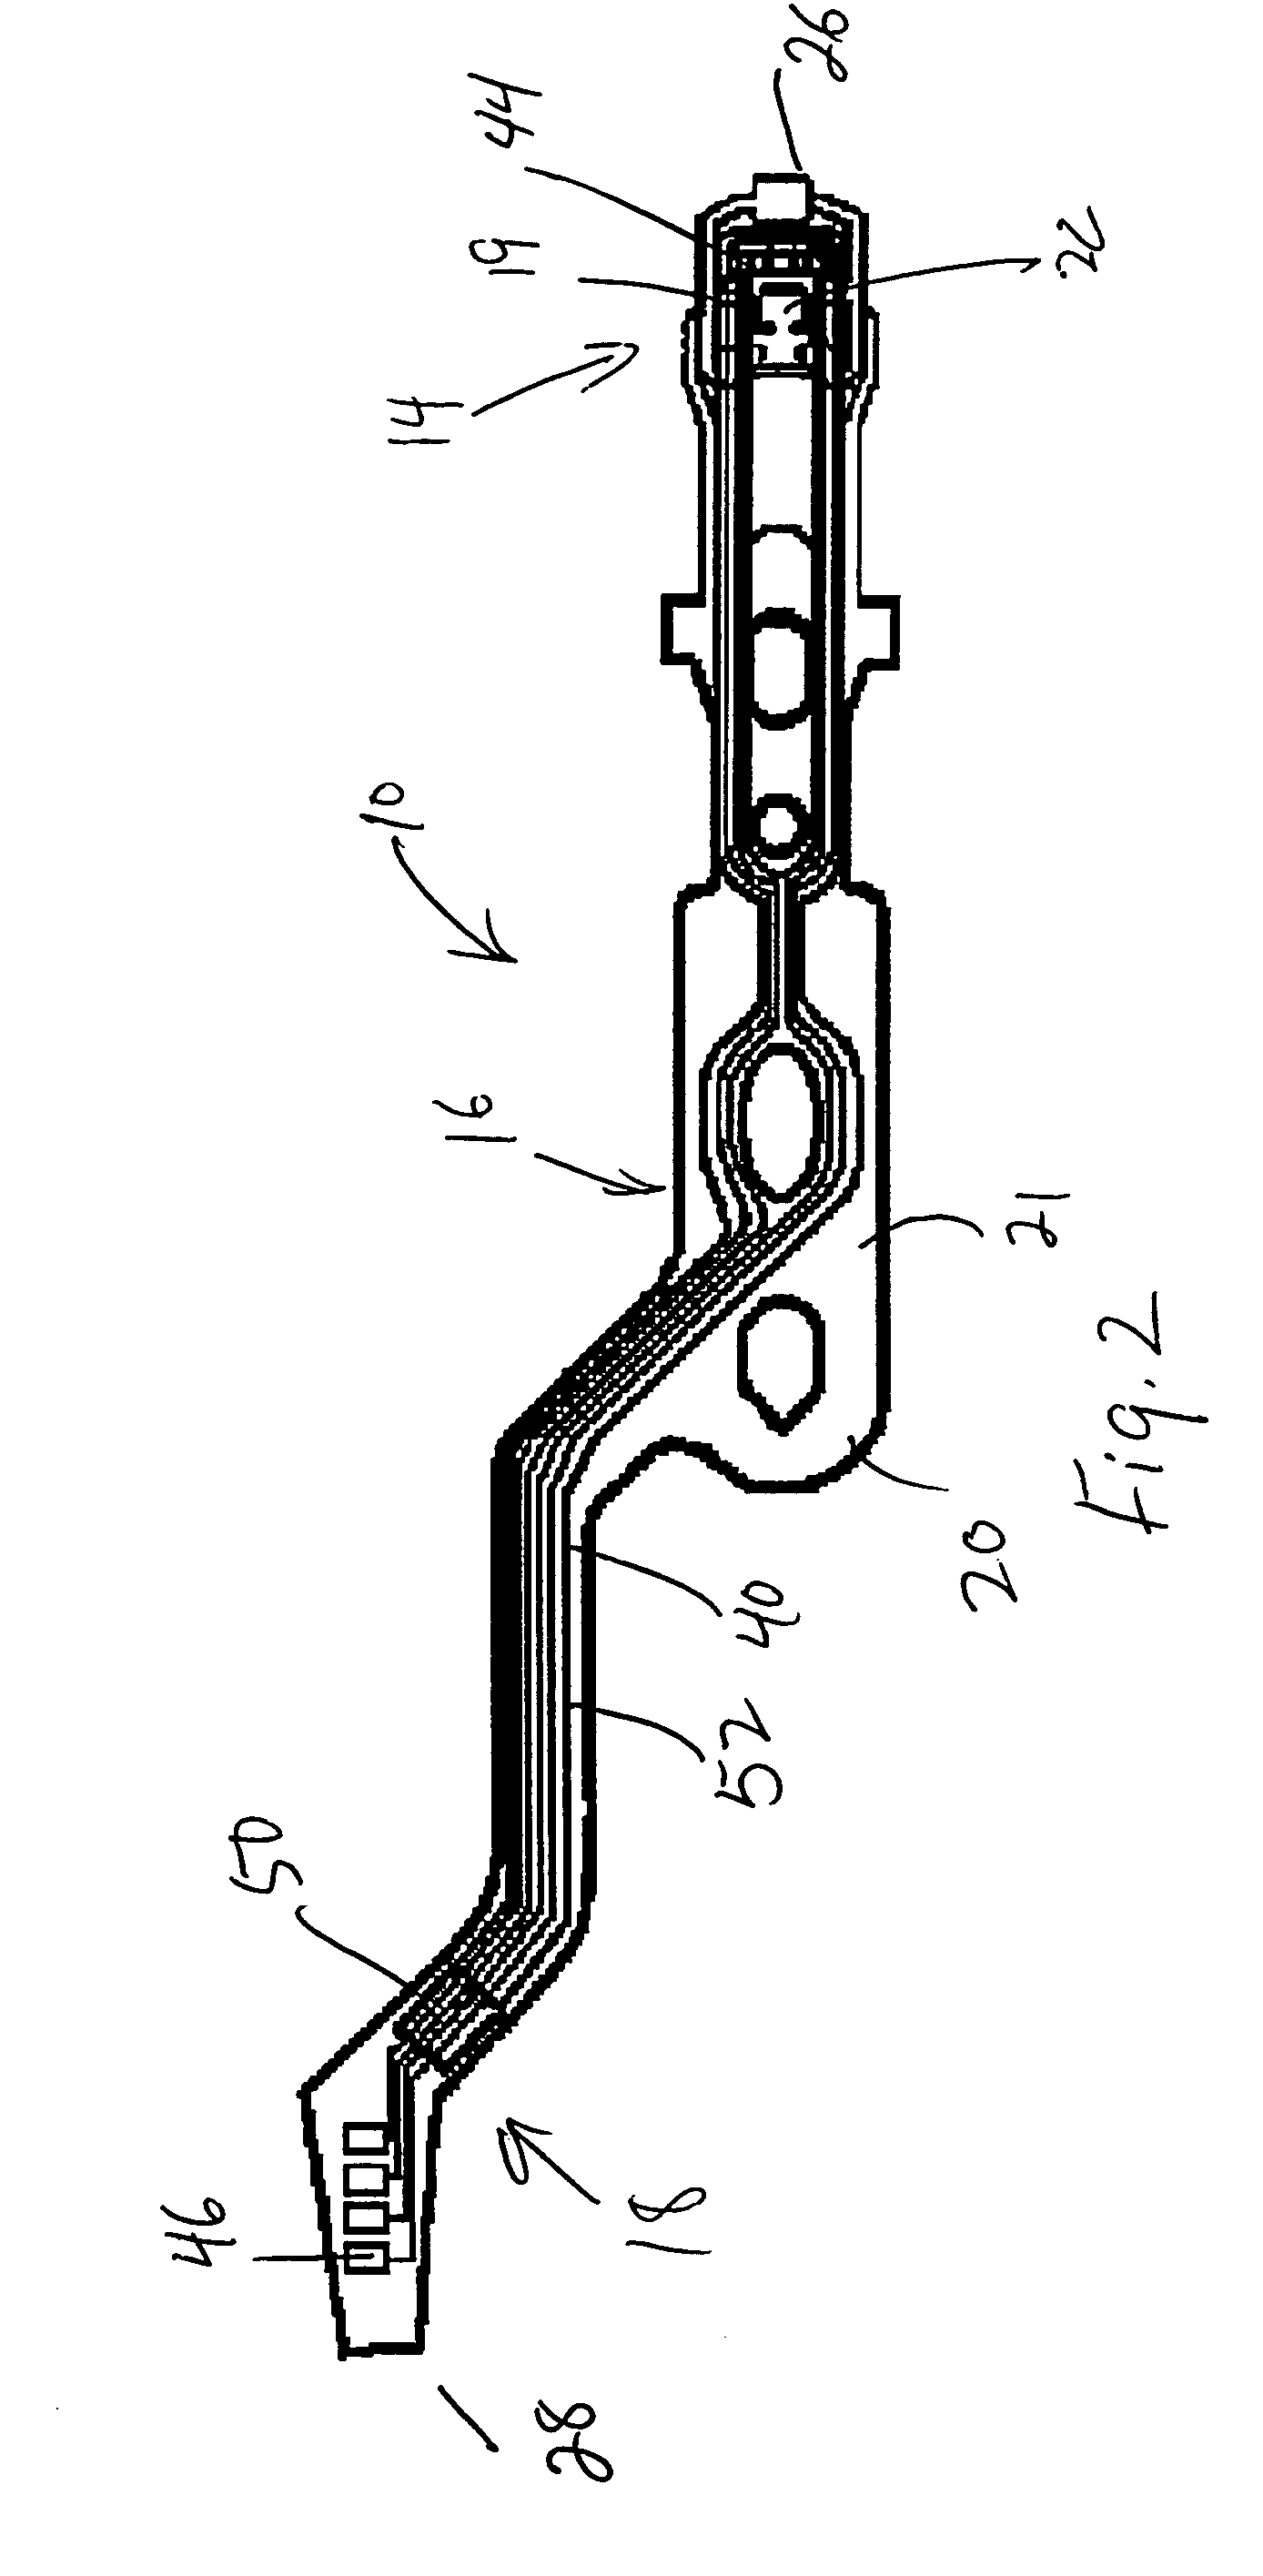 Method for making noble metal conductive leads for suspension assemblies